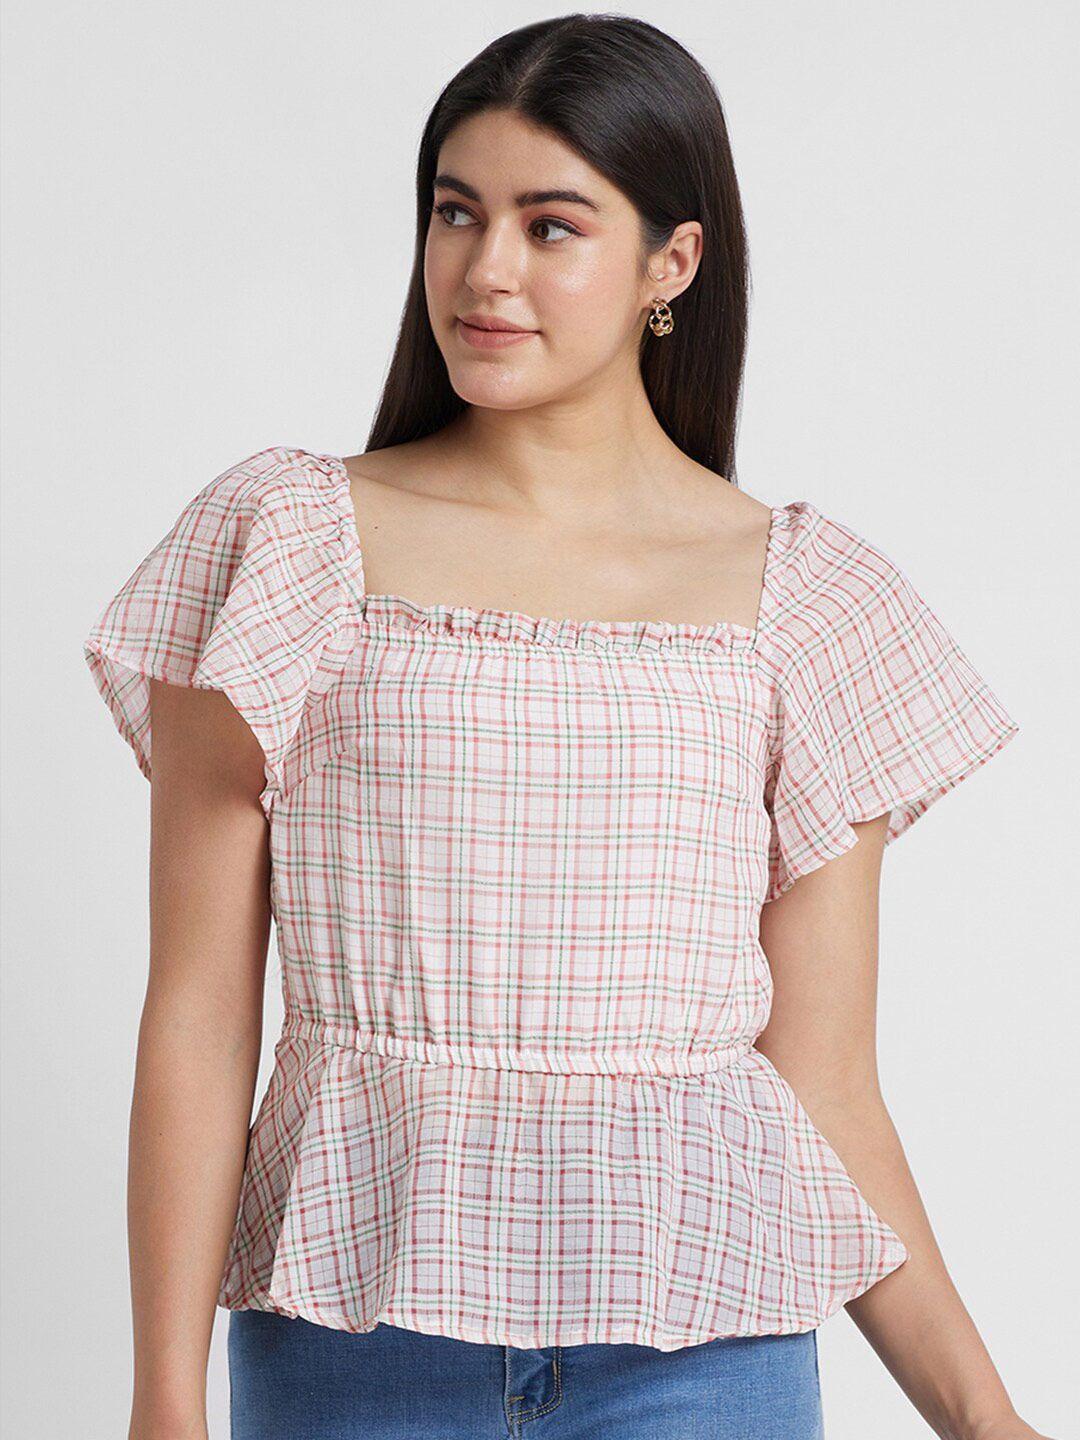 globus-checked-square-neck-flared-sleeves-peplum-top